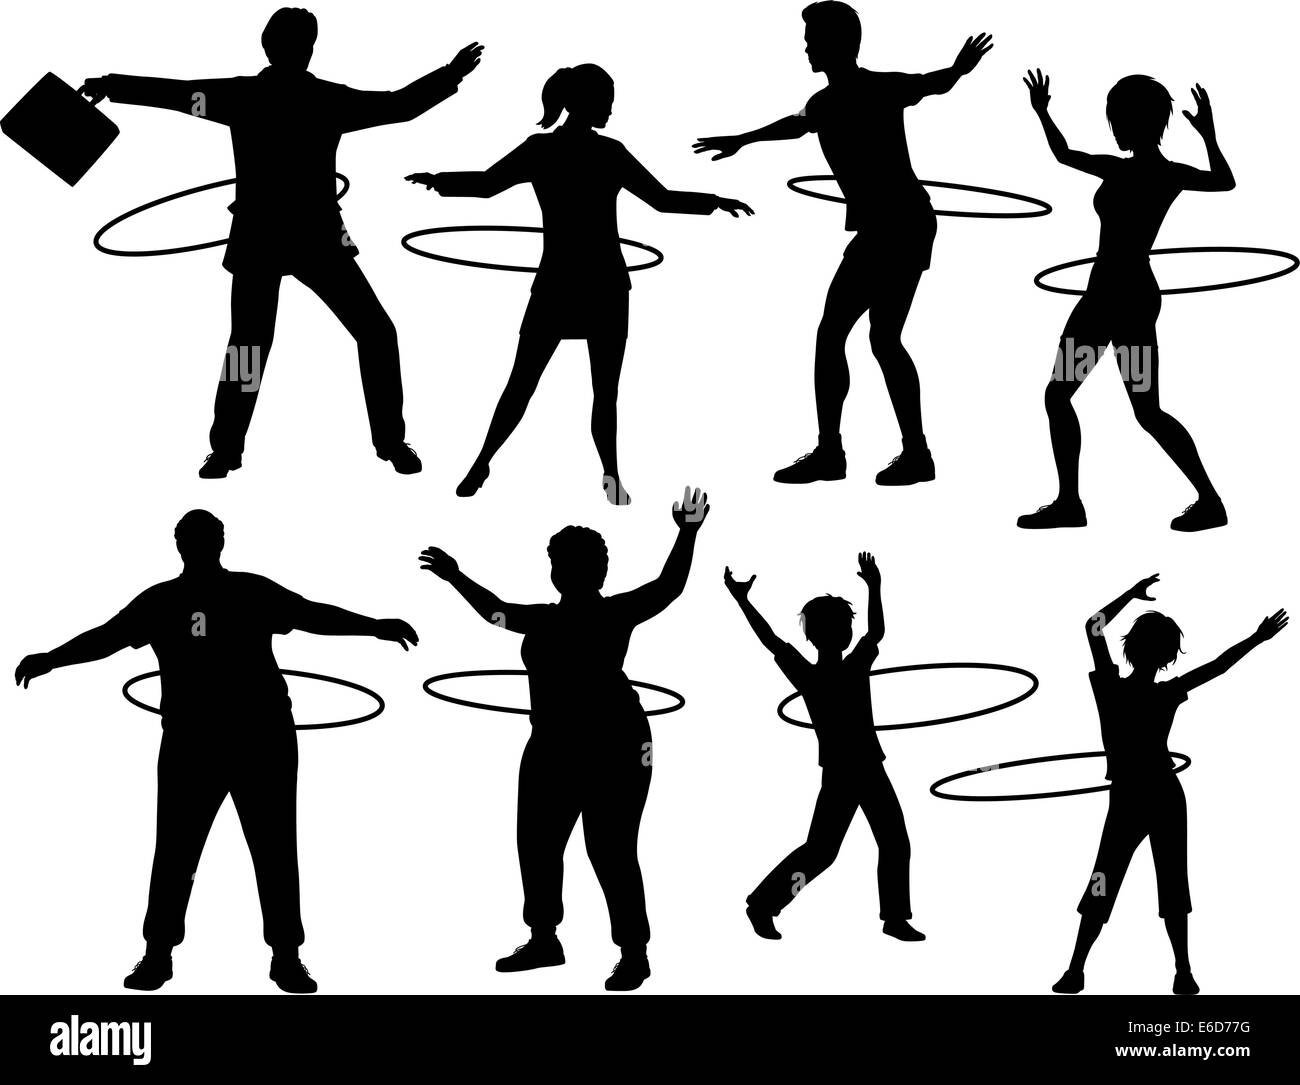 Set of editable vector silhouettes of people exercising with a hula hoop with figures and hoops as separate objects Stock Vector